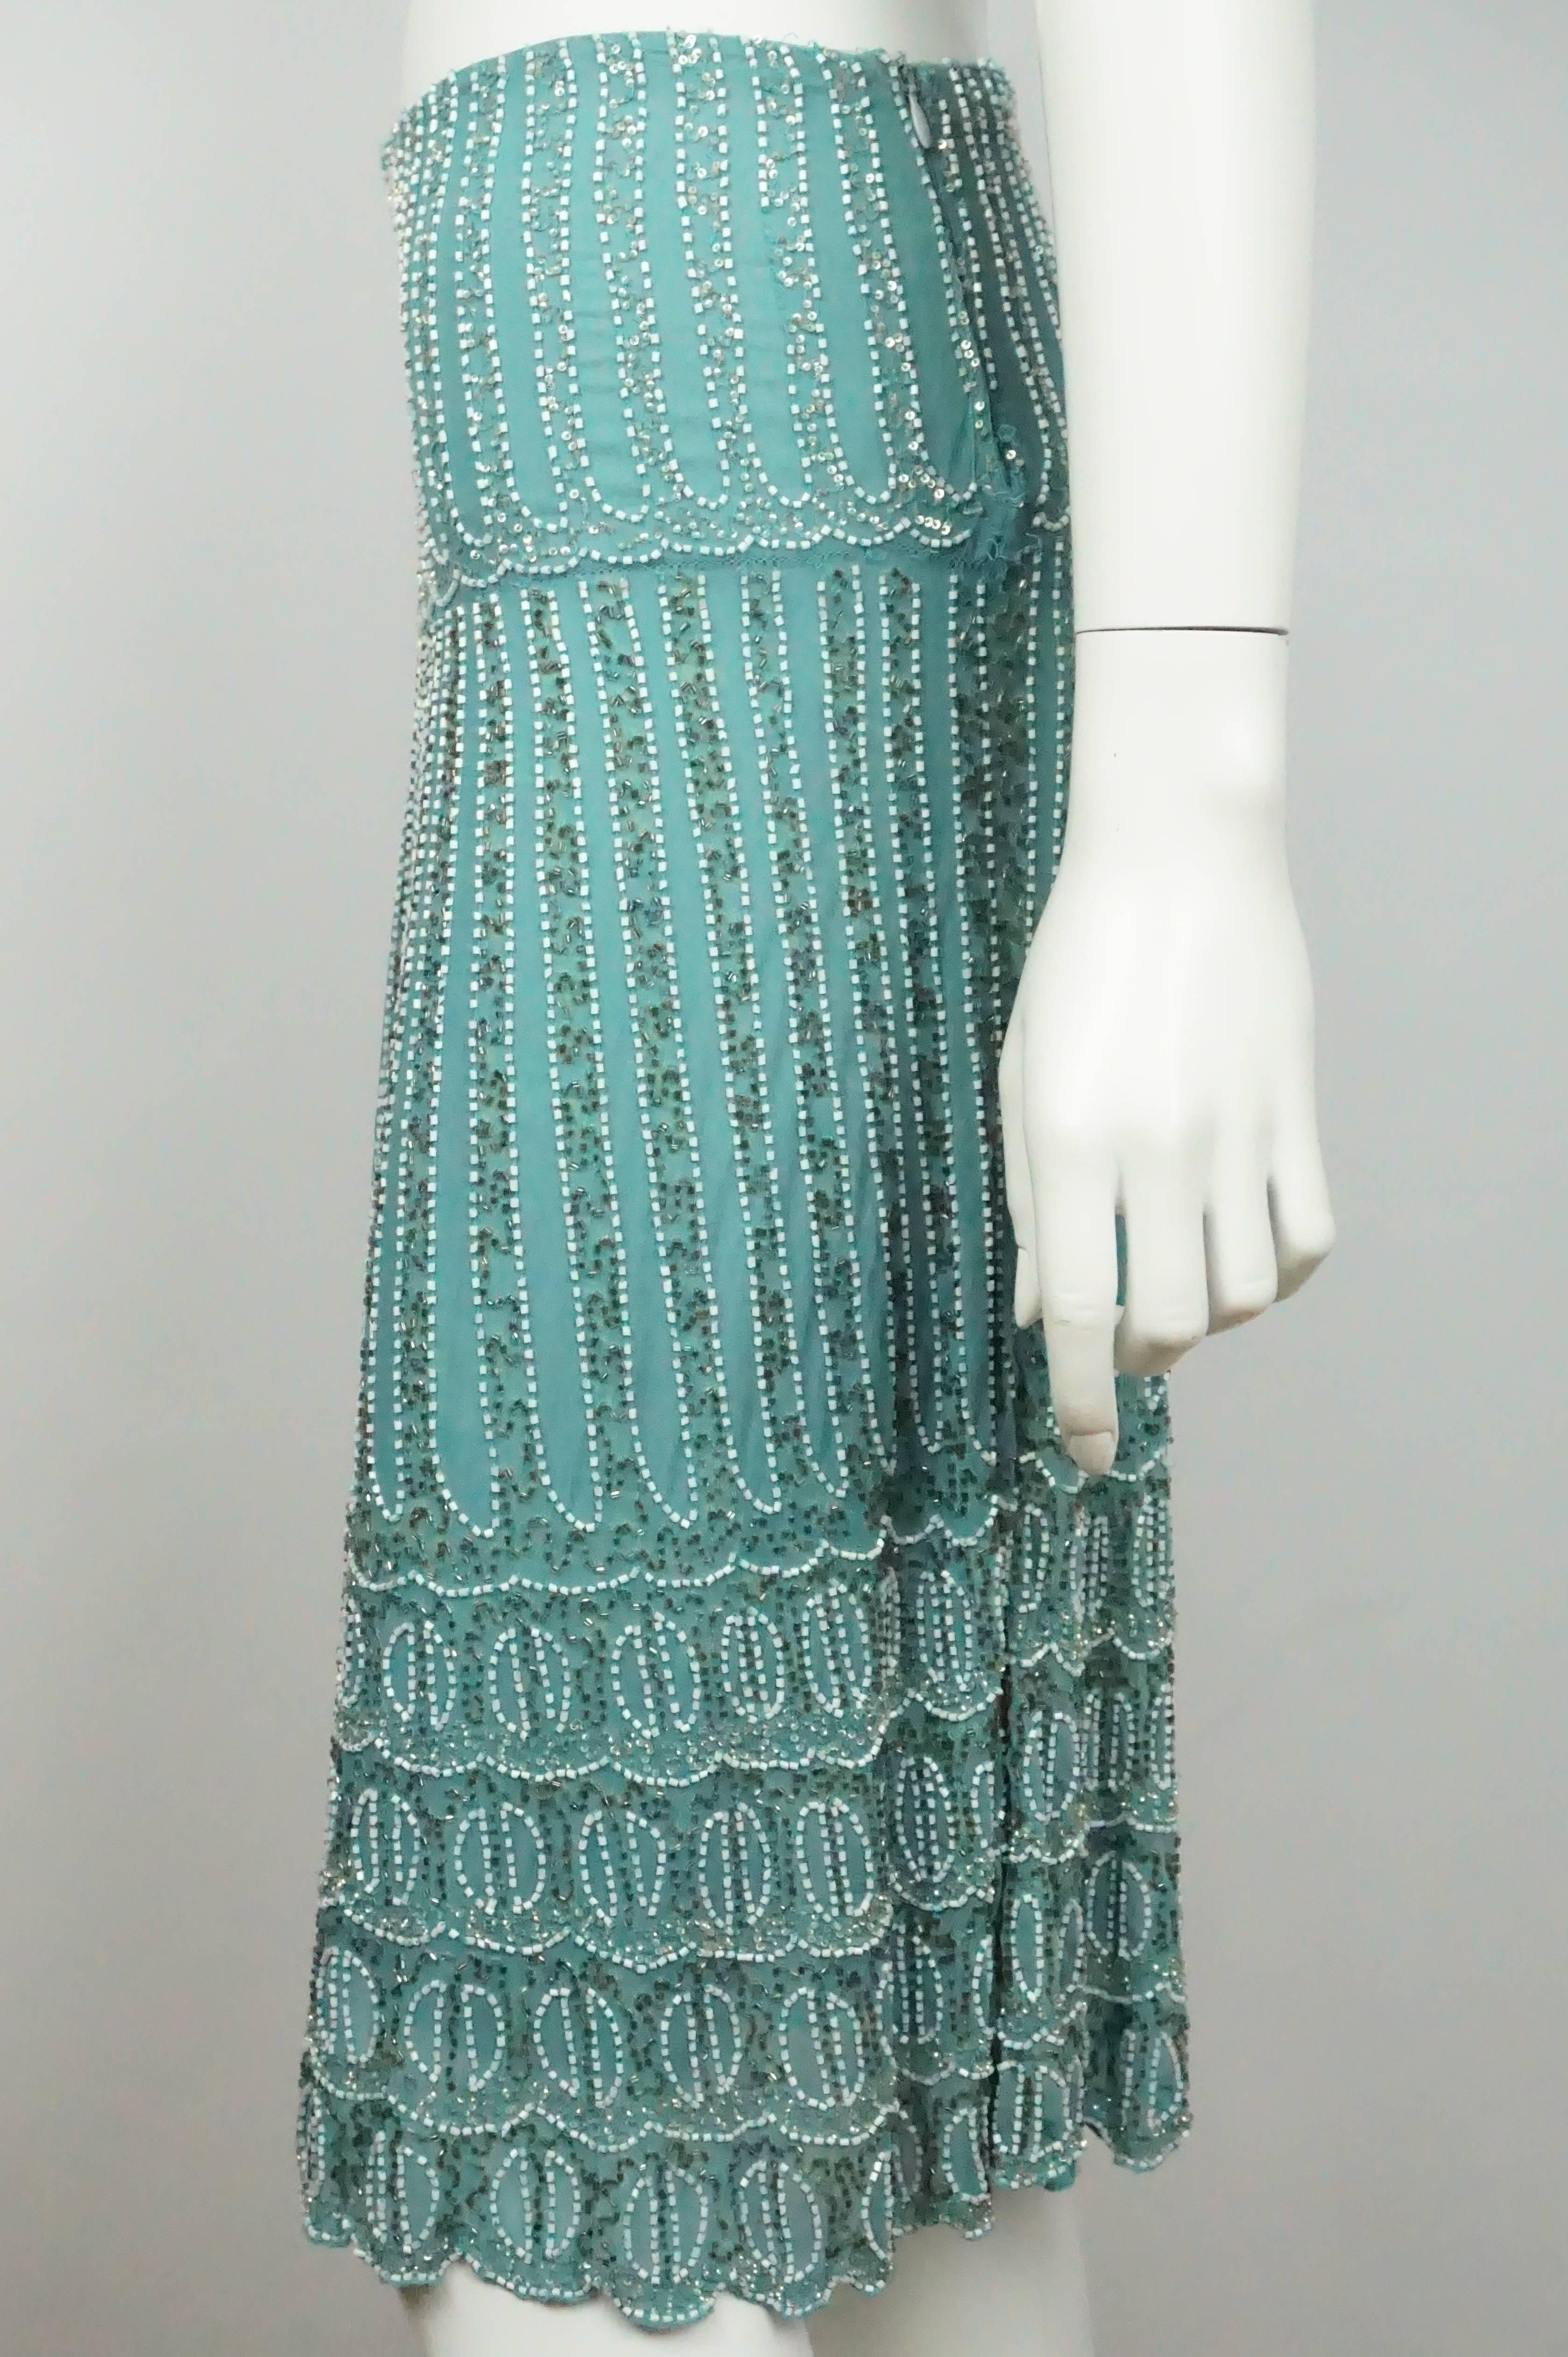 Bluemarine Turquoise Silk And White Beaded Skirt - 40  This stunning vintage beaded swing skirt is in excellent condition. The skirt is completely embellished with white and silver beading and gold sequins. The skirt is completely made of silk and